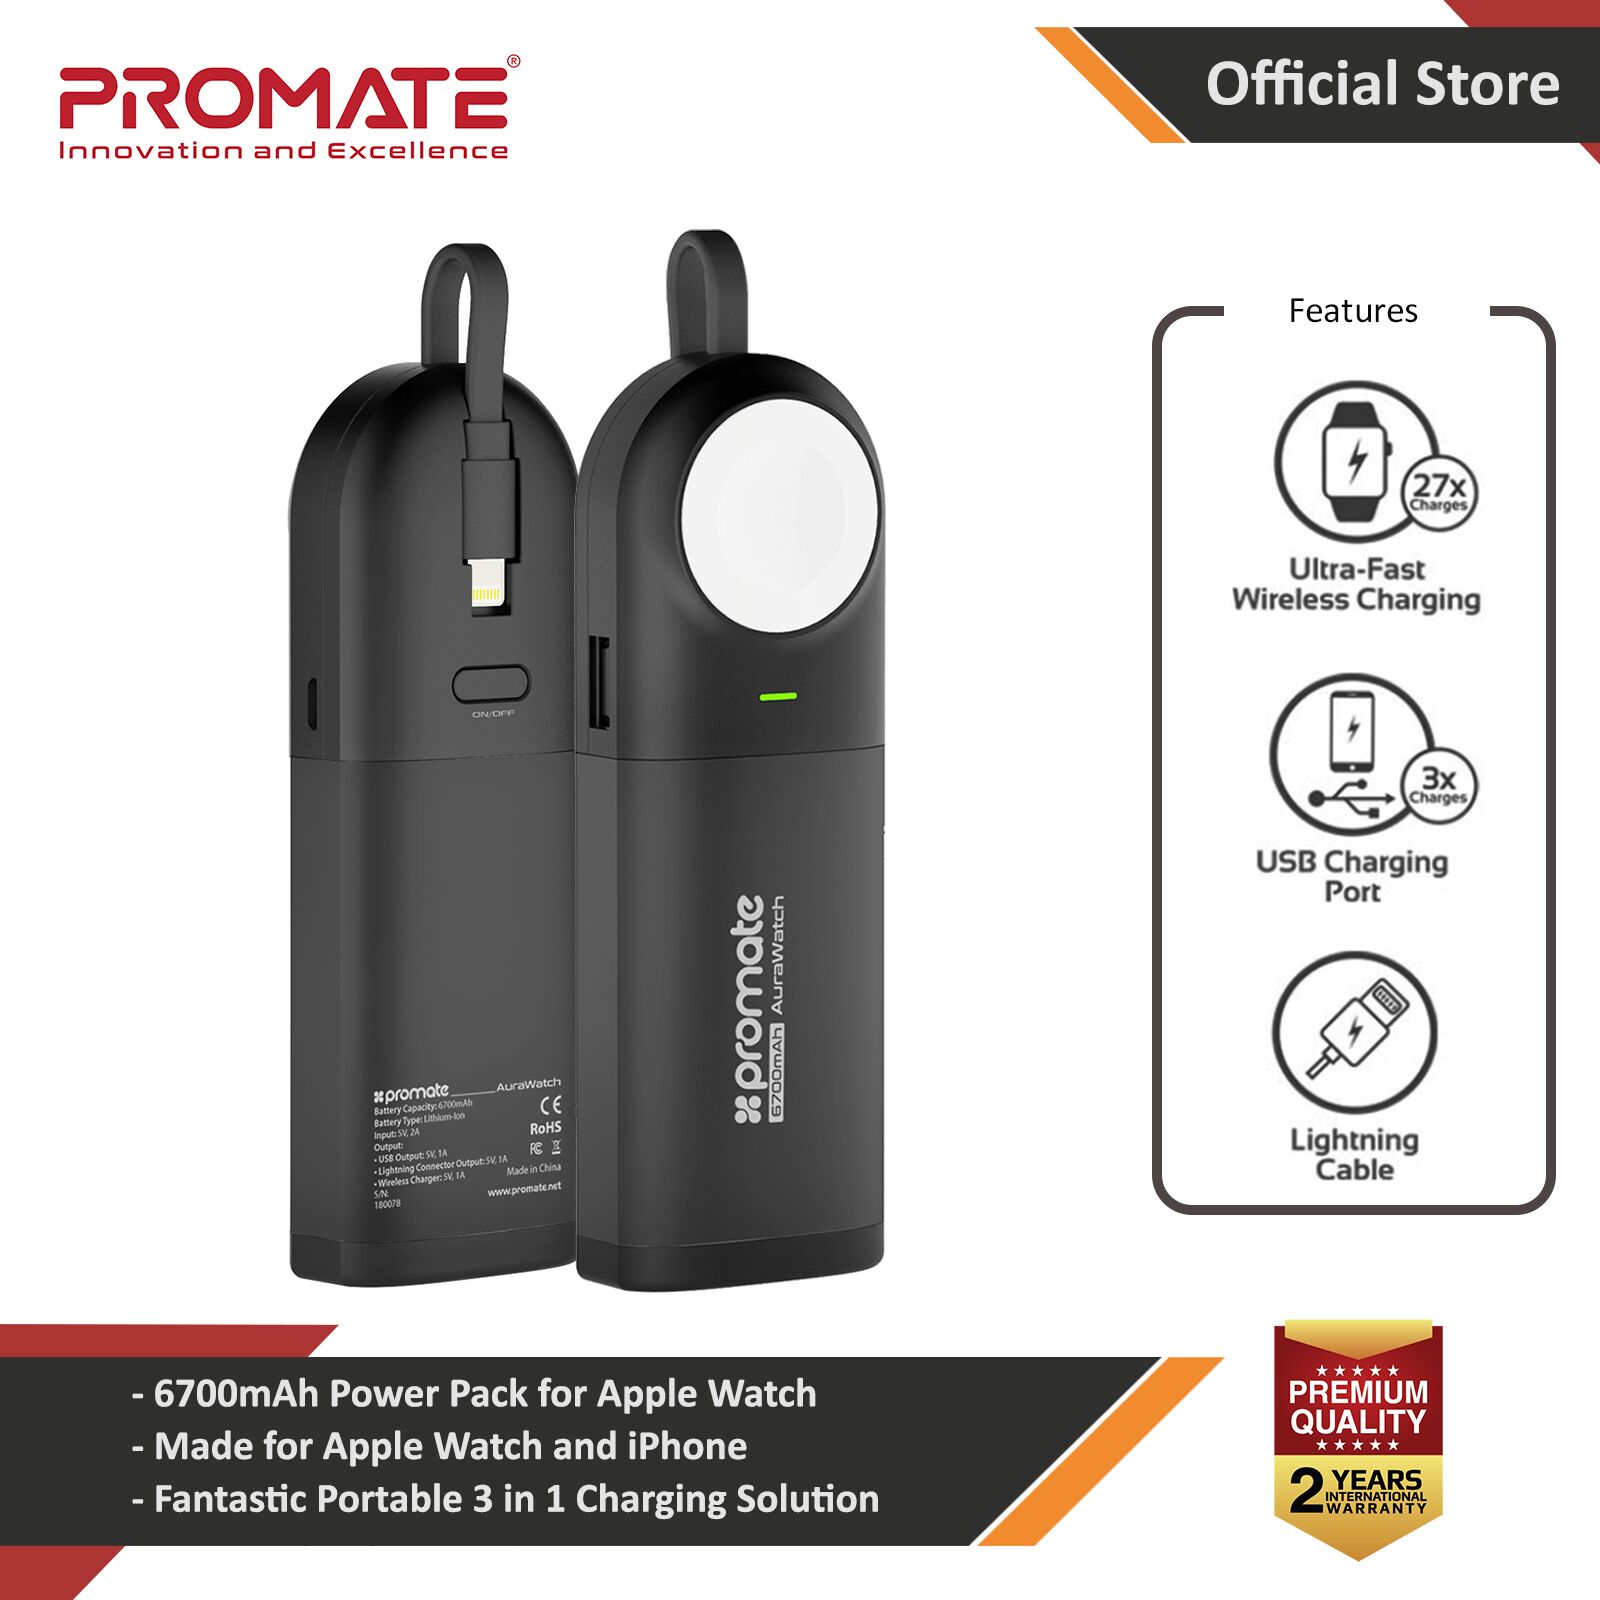 Picture of Promate Apple Watch Power Bank Charger, Apple MFi Certified 6700mAh Charger Battery Pack for Apple Watch with Built-In Lightning Cable and Ultra-Fast USB Port for Apple Watch 40mm 38mm 42mm 44mm Series 1 2 3 4 5 iPhone, Samsung, AuraWatch Red Design- Red Design Cases, Red Design Covers, iPad Cases and a wide selection of Red Design Accessories in Malaysia, Sabah, Sarawak and Singapore 